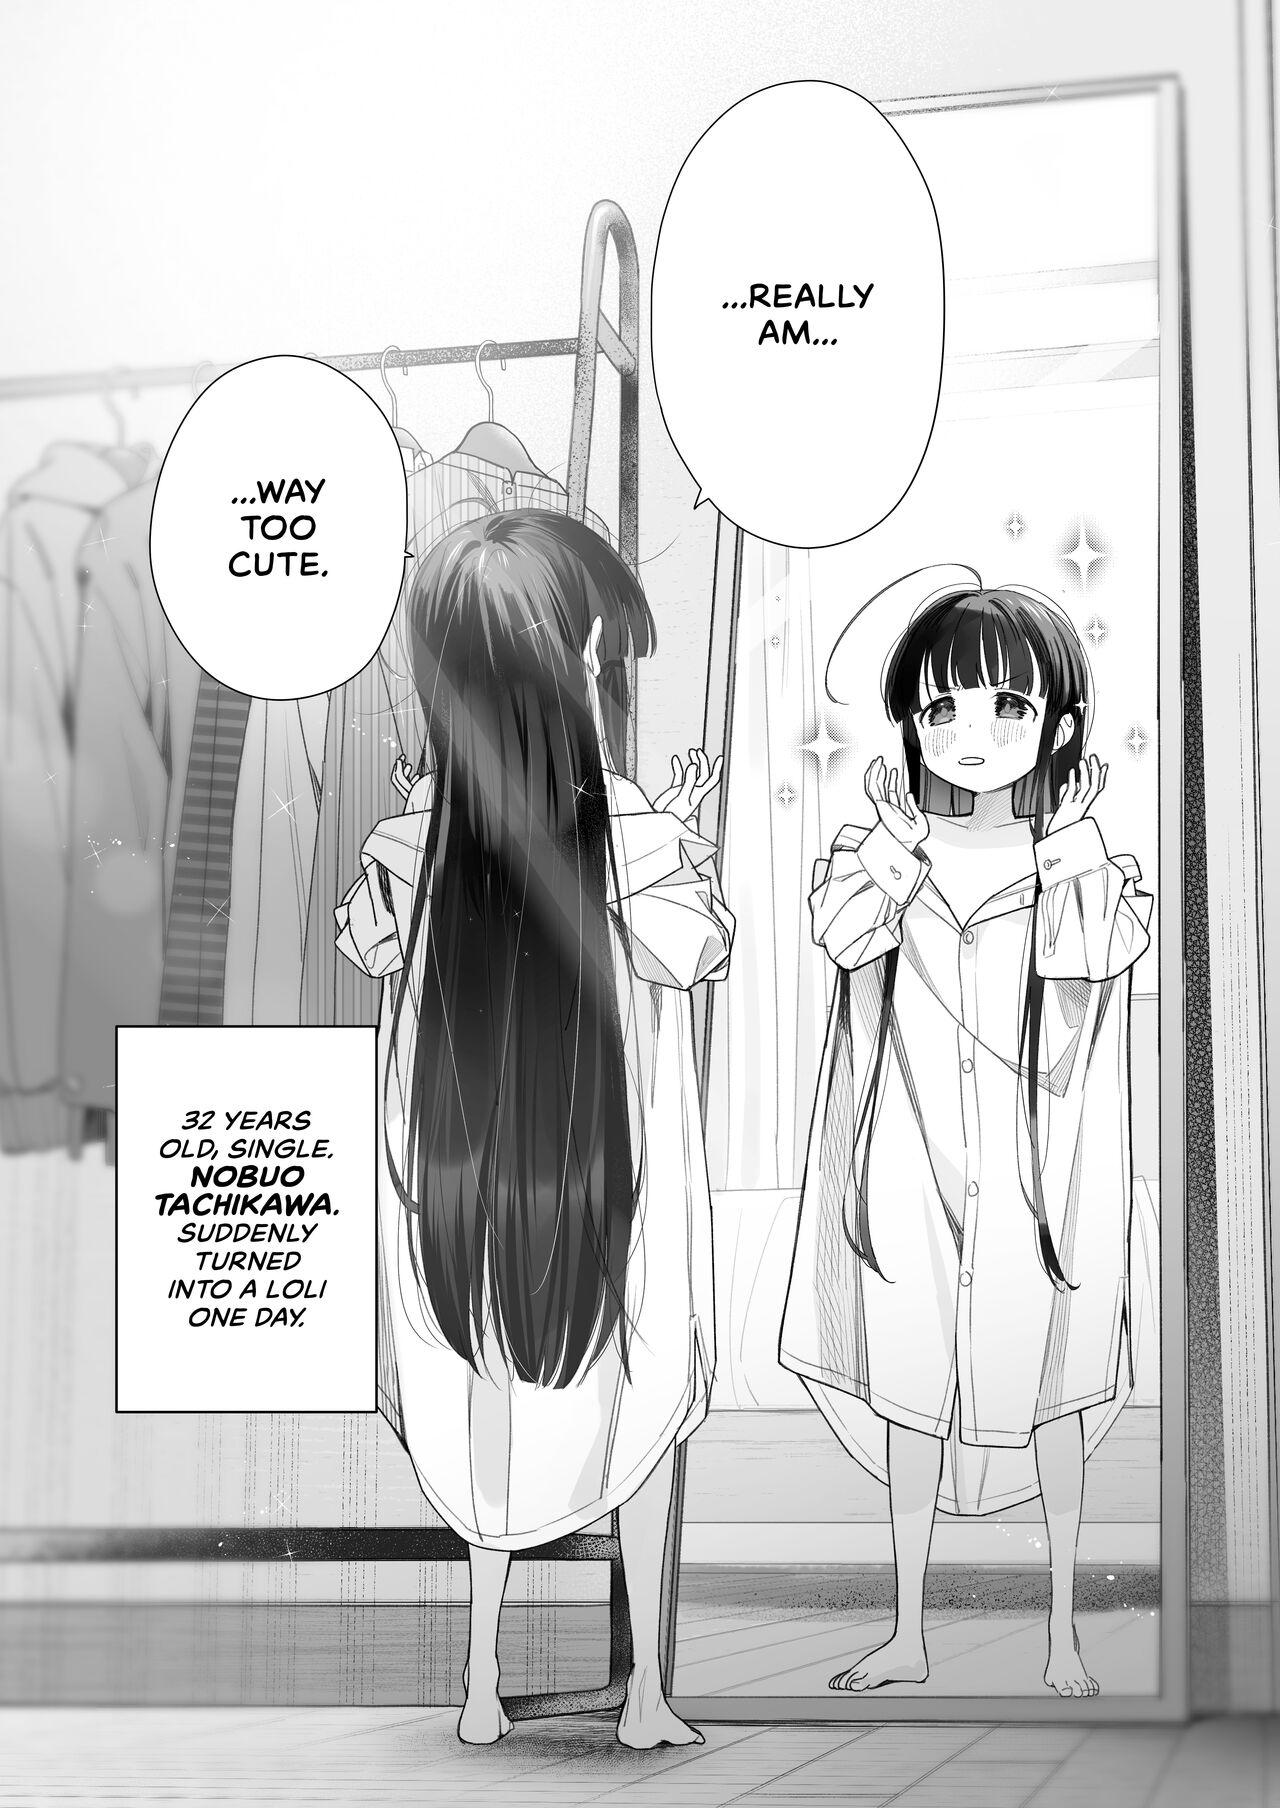 Free Porn Amateur [Asunaro Neat. (Ronna)] TS Loli Oji-san no Bouken Onanie Hen | The Adventures of an Old Man Who Was Gender-Swapped Into a Loli ~Masturbation Chapter~ [English] [CulturedCommissions] [Digital] - Original Travesti - Picture 3